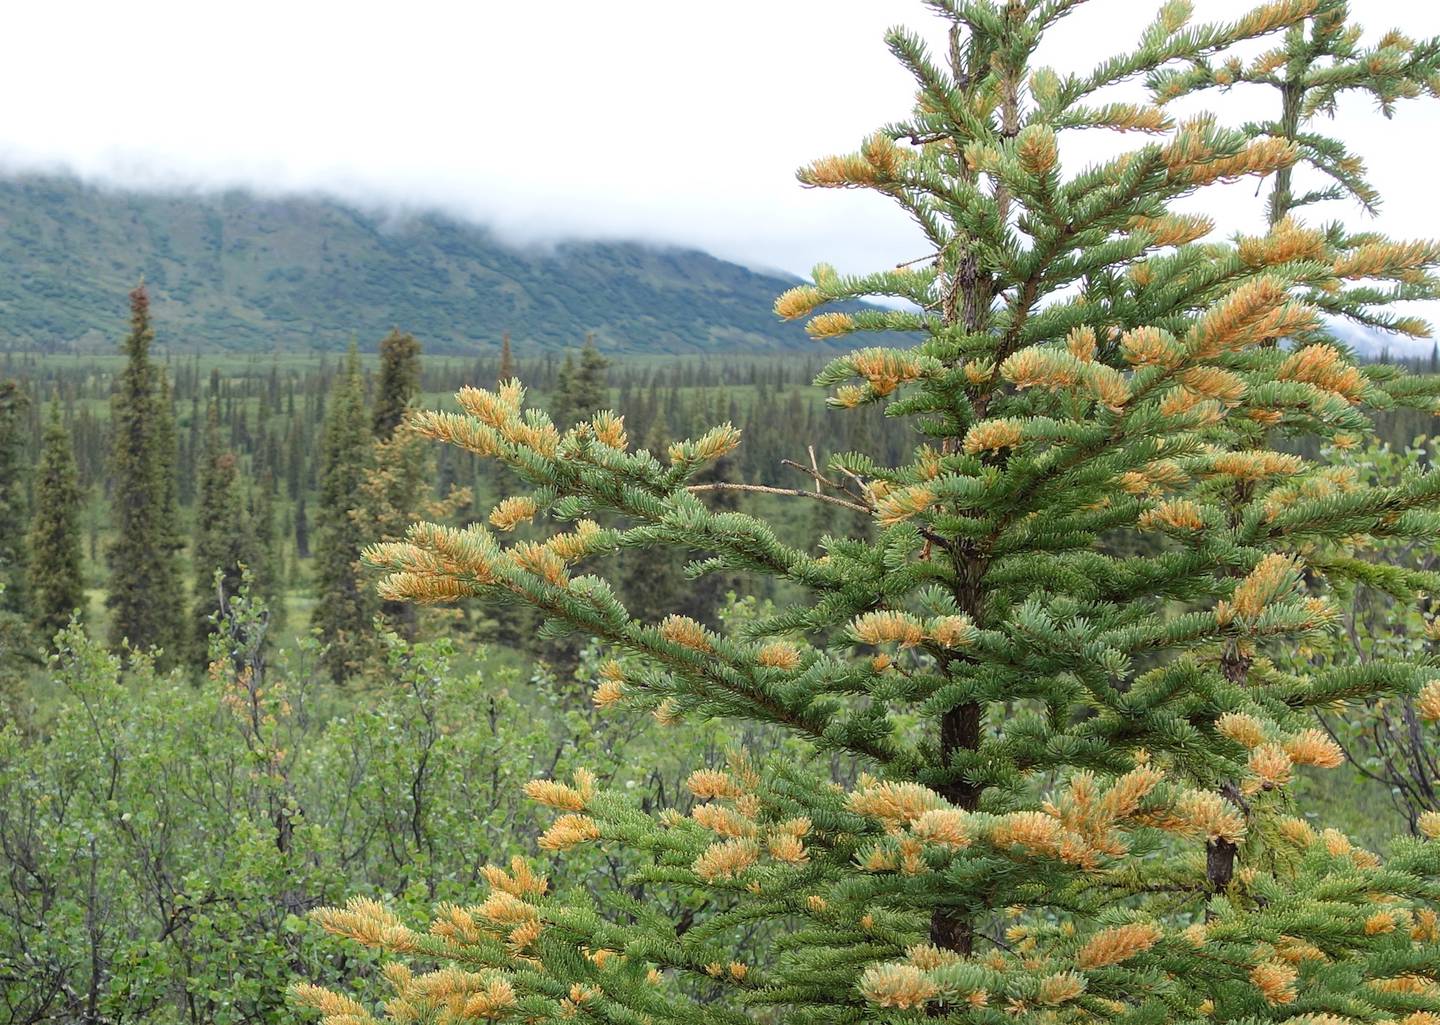 A white spruce tree infected by spruce needle rust fungus